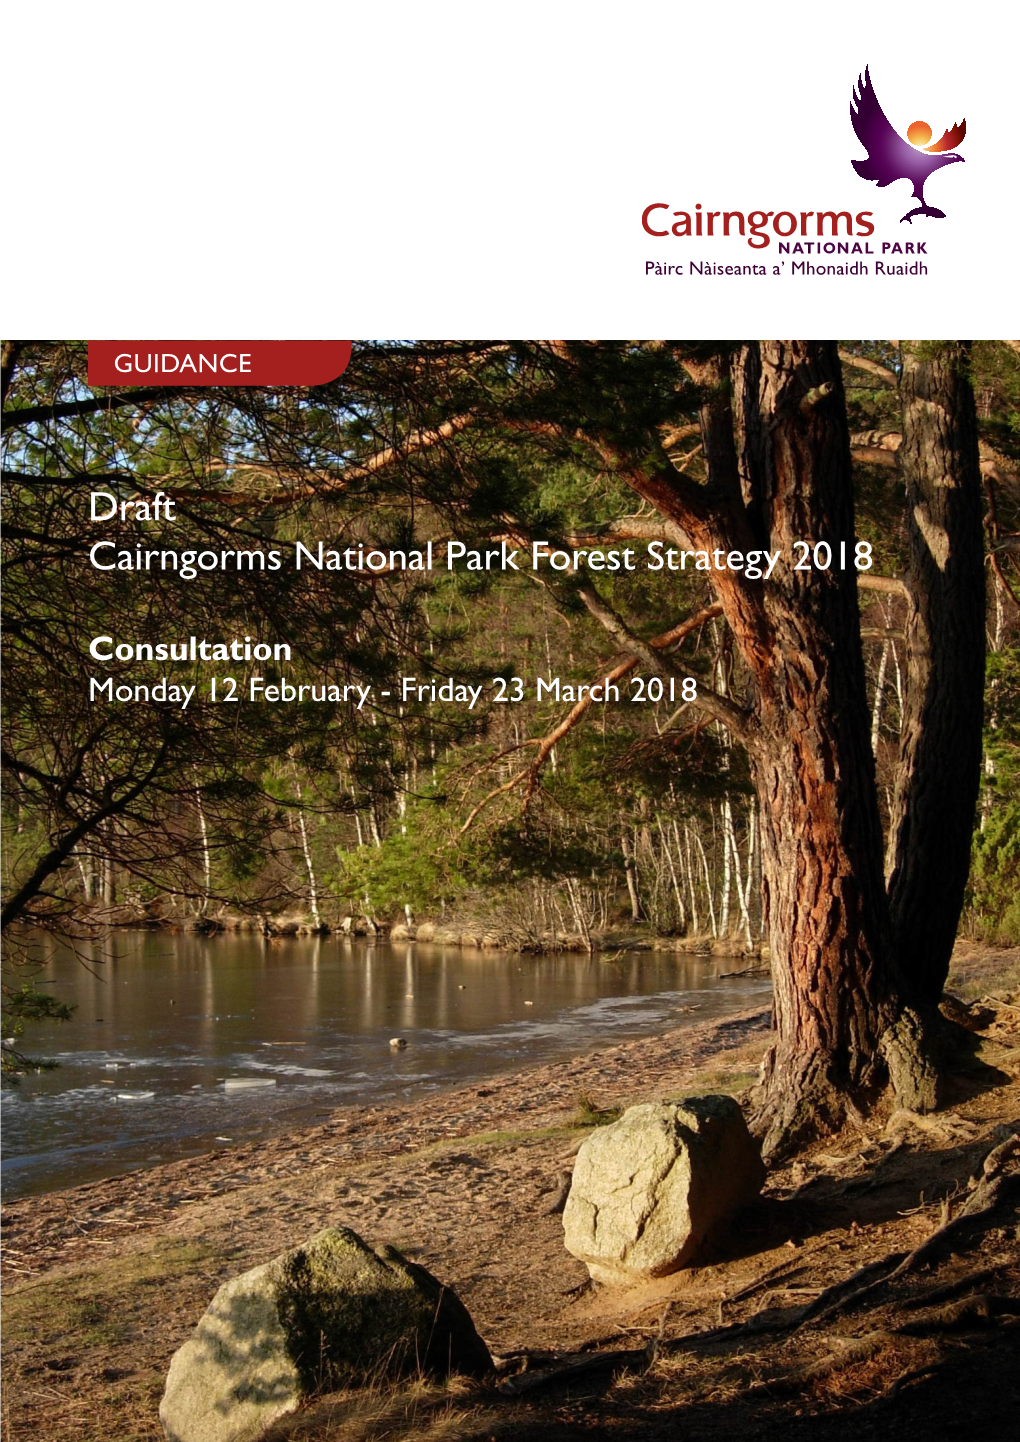 Draft Cairngorms National Park Forest Strategy 2018